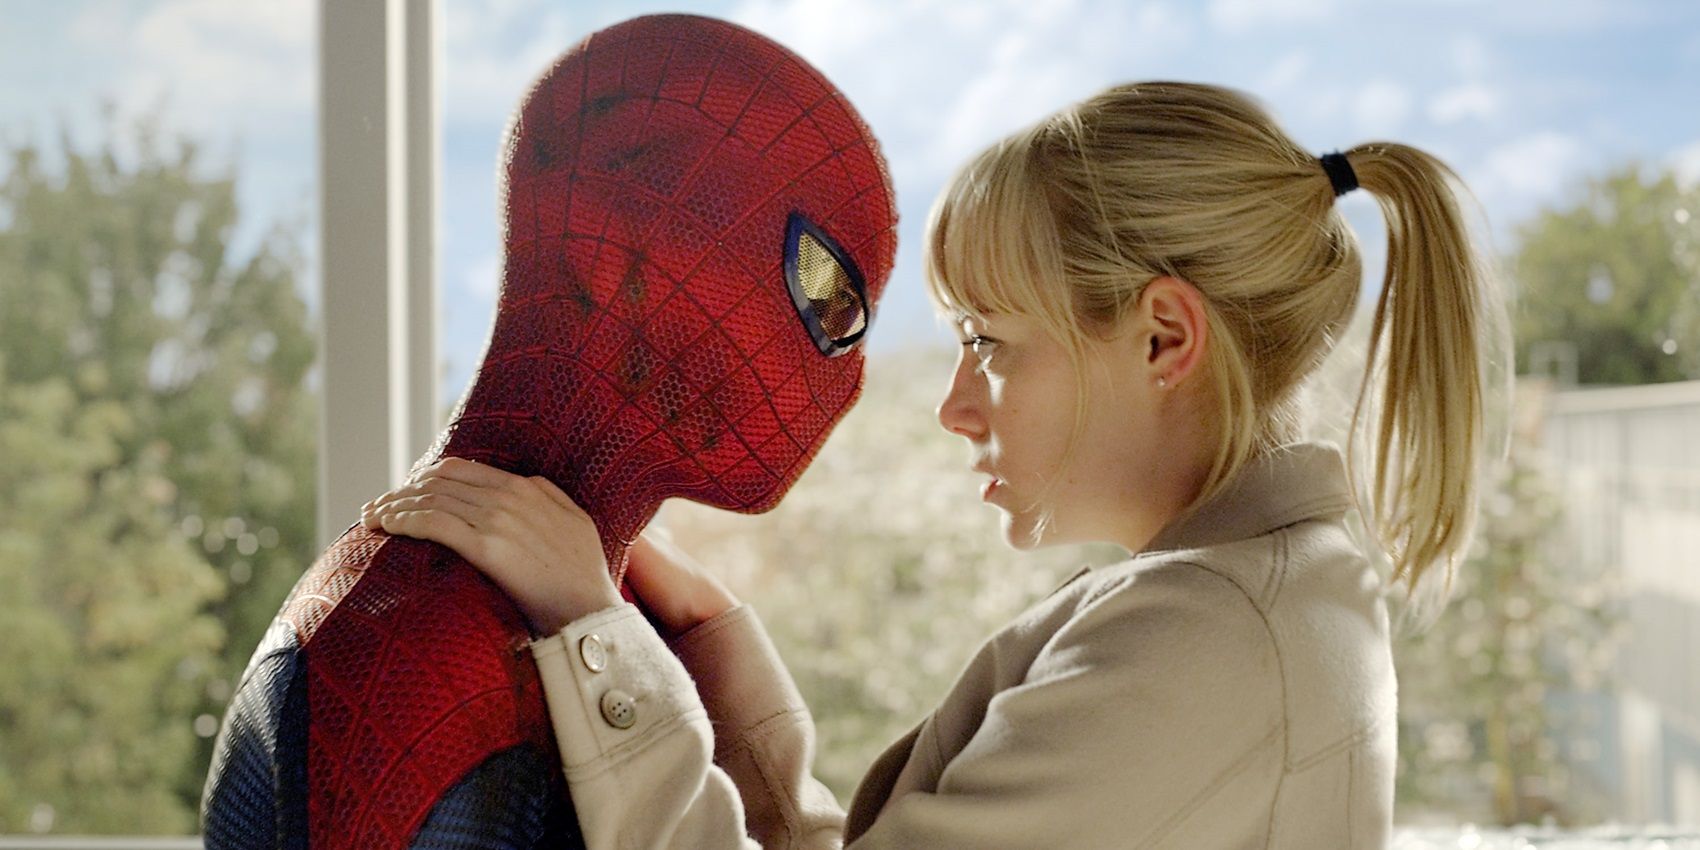 Spidey and Gwen embrace in The Amazing Spider-Man